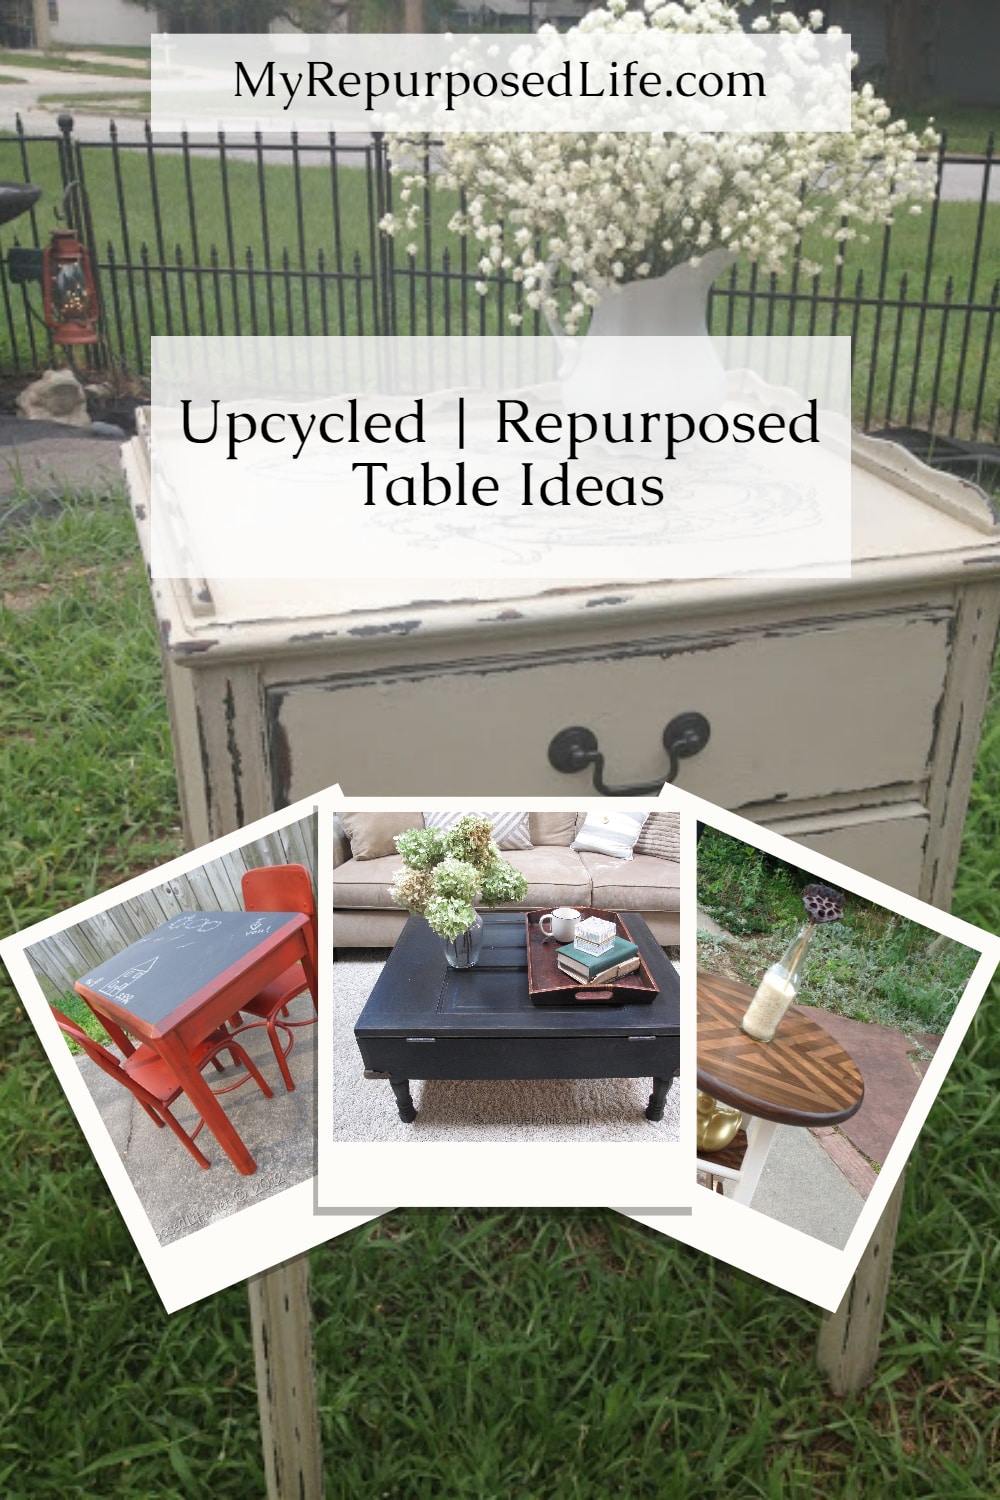 This roundup of 50+ repurposed table ideas will give you lots of inspiration to transform that table you have just waiting for a makeover. #myRepurposedLife #Repurposed #table #project #ideas via @repurposedlife